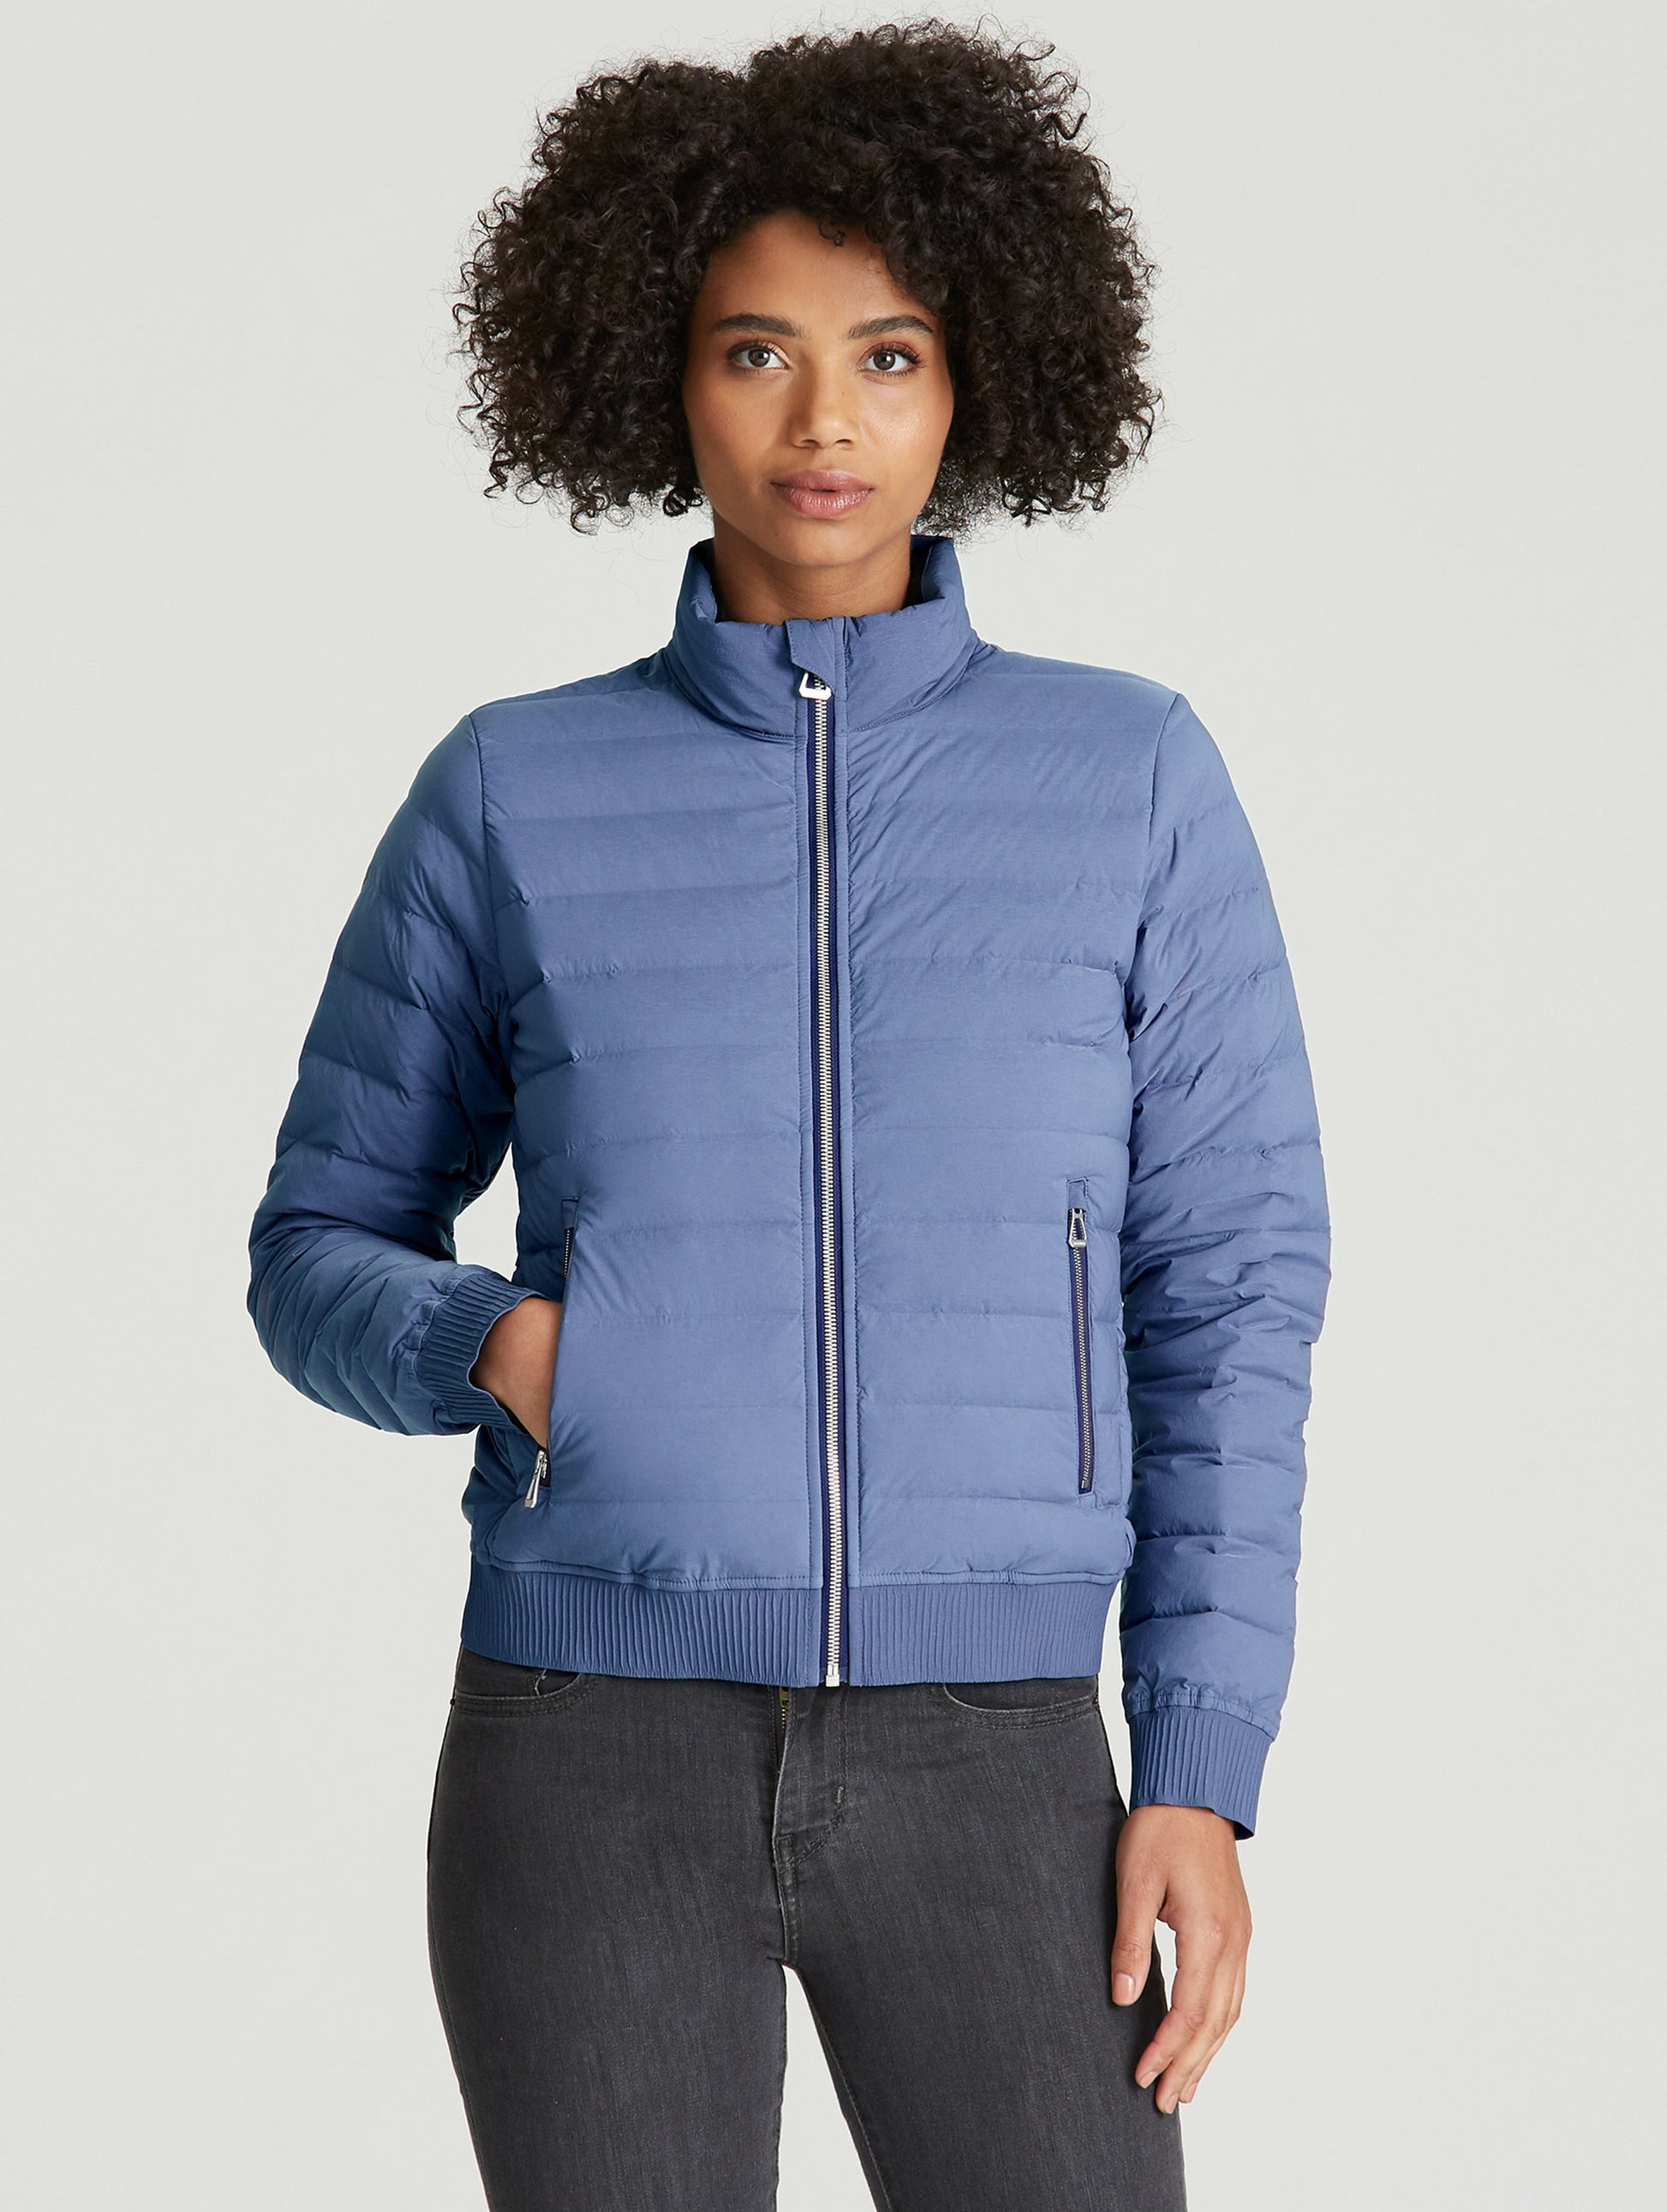 insulated jackets for women from Aether Apparel